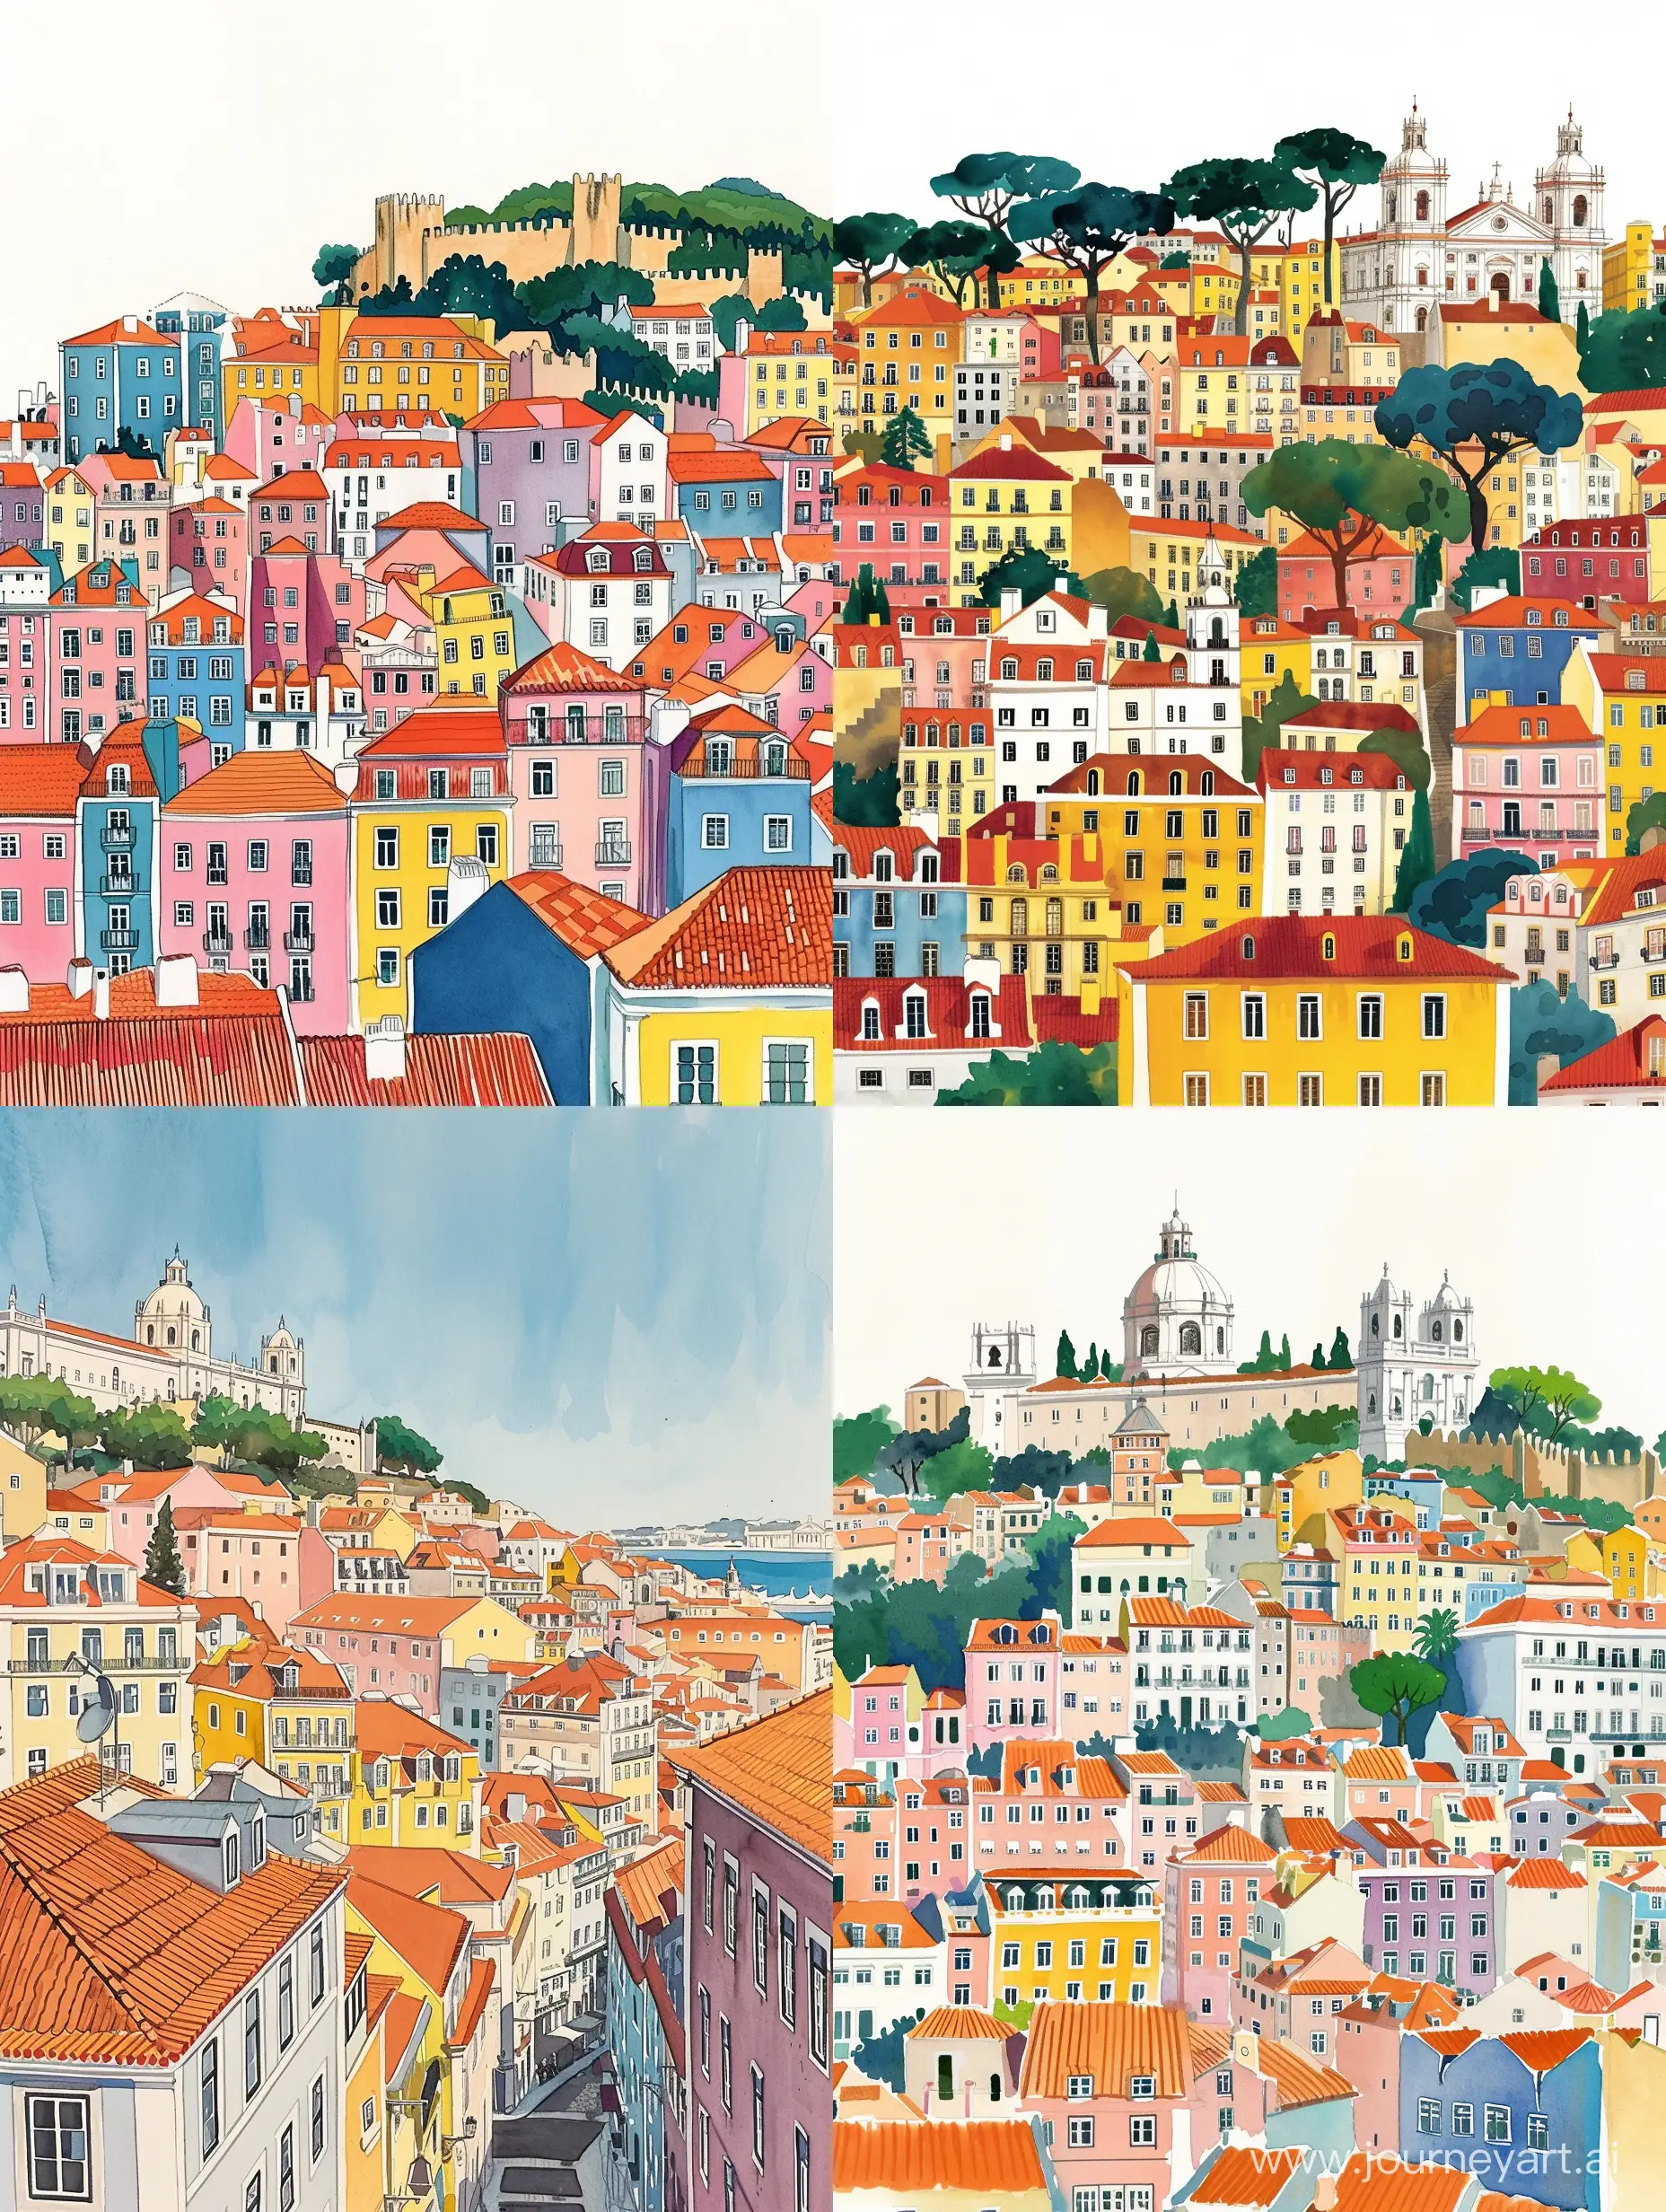 The city of Lisbon with watercolor paints , illustration size: width 32 cm, height 15 cm